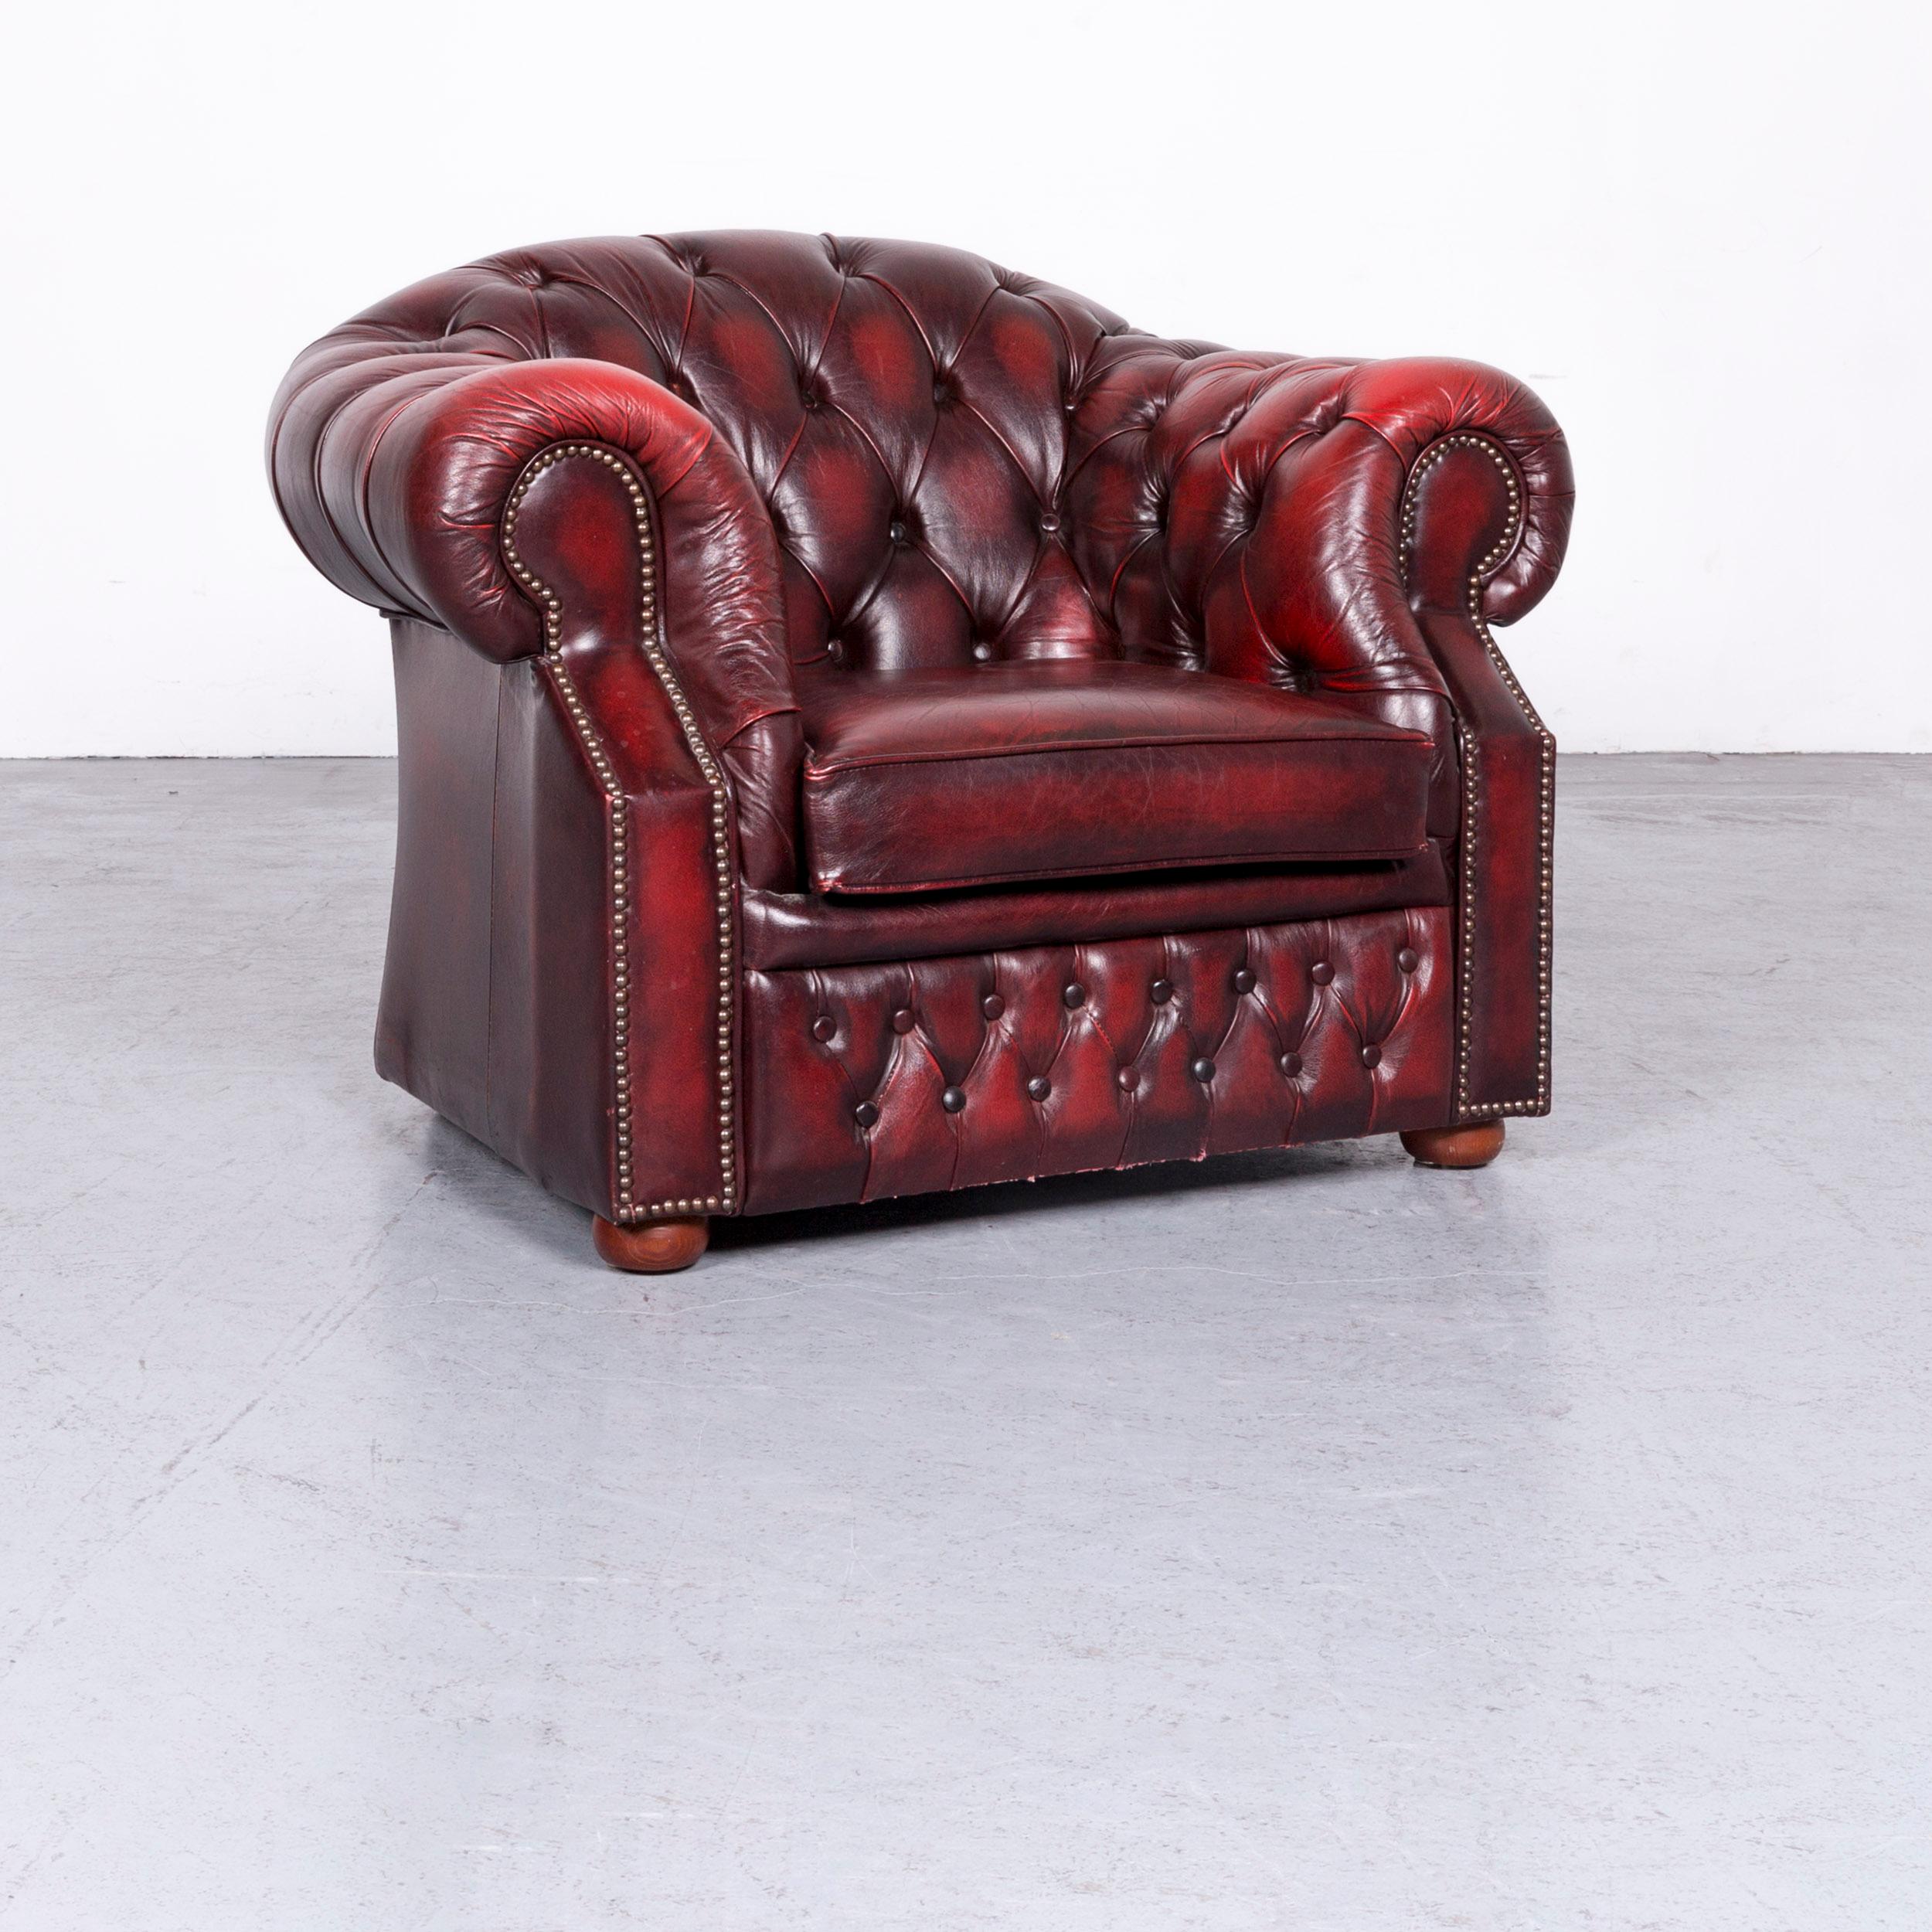 Chesterfield Centurion Leather Sofa Armchair Set Red Two-Seat Vintage Couch 4